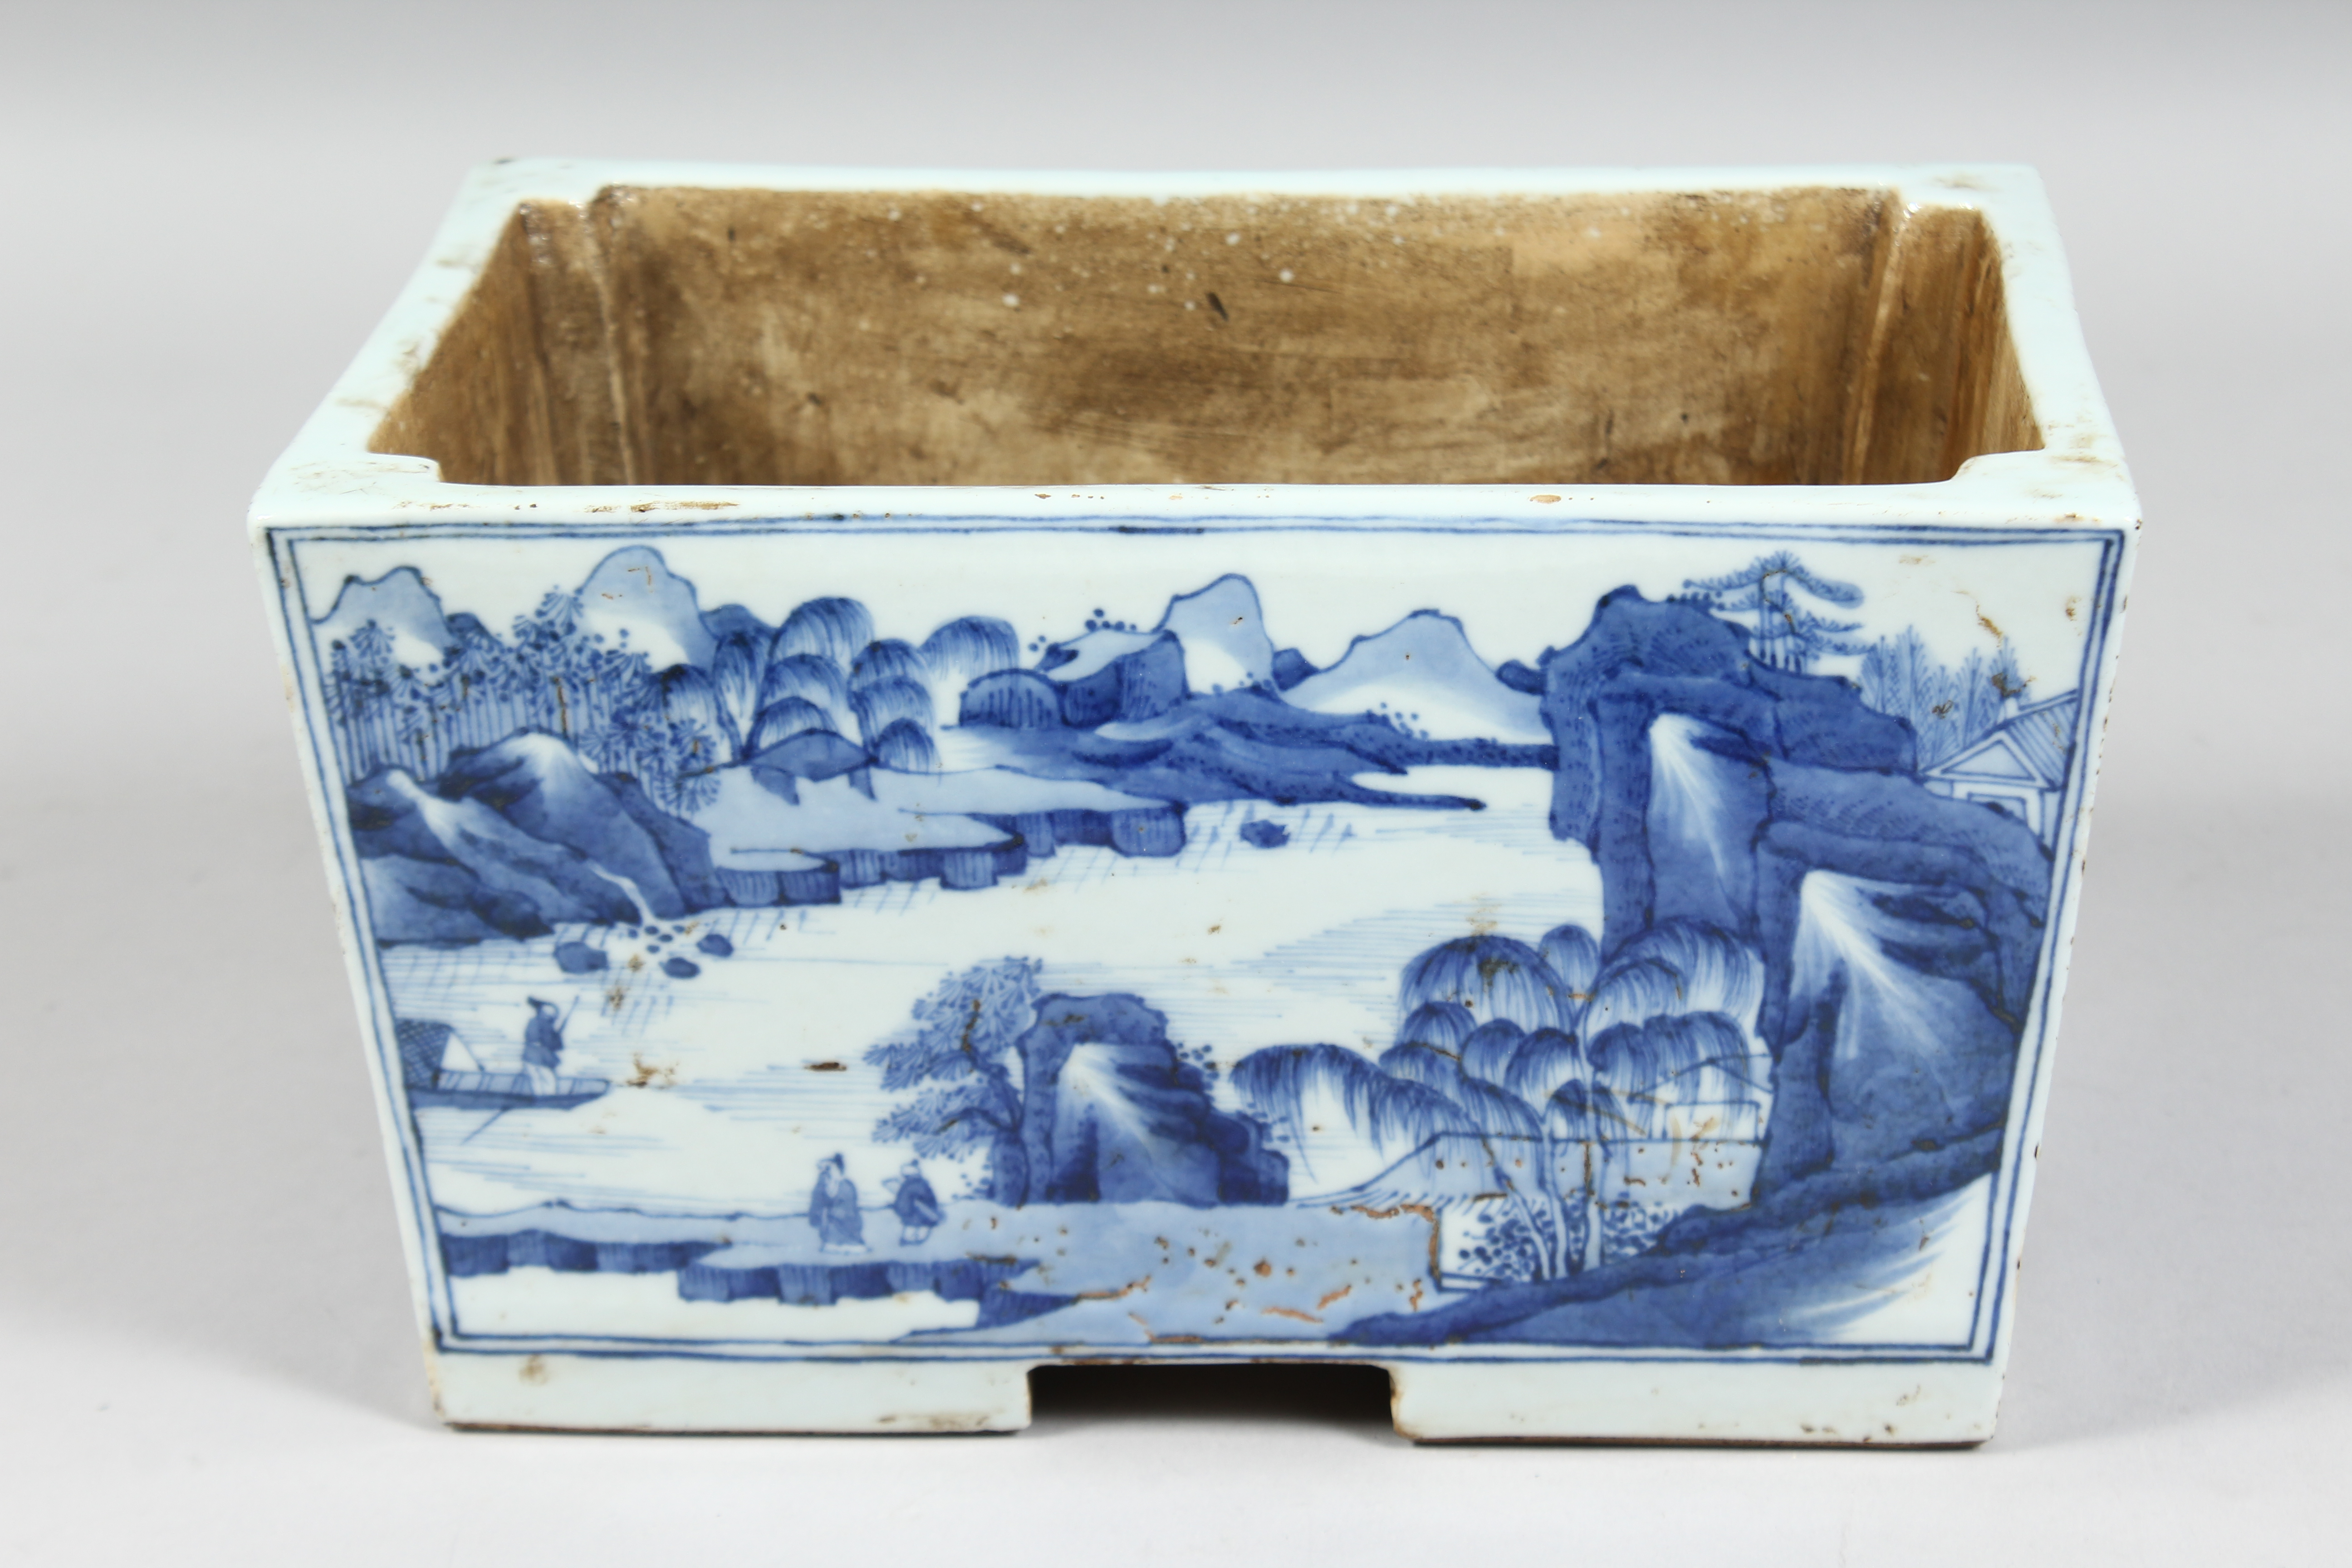 A CHINESE BLUE AND WHITE PORCELAIN RECTANGULAR PLANTER, each side depicting landscape scenes with - Image 3 of 6